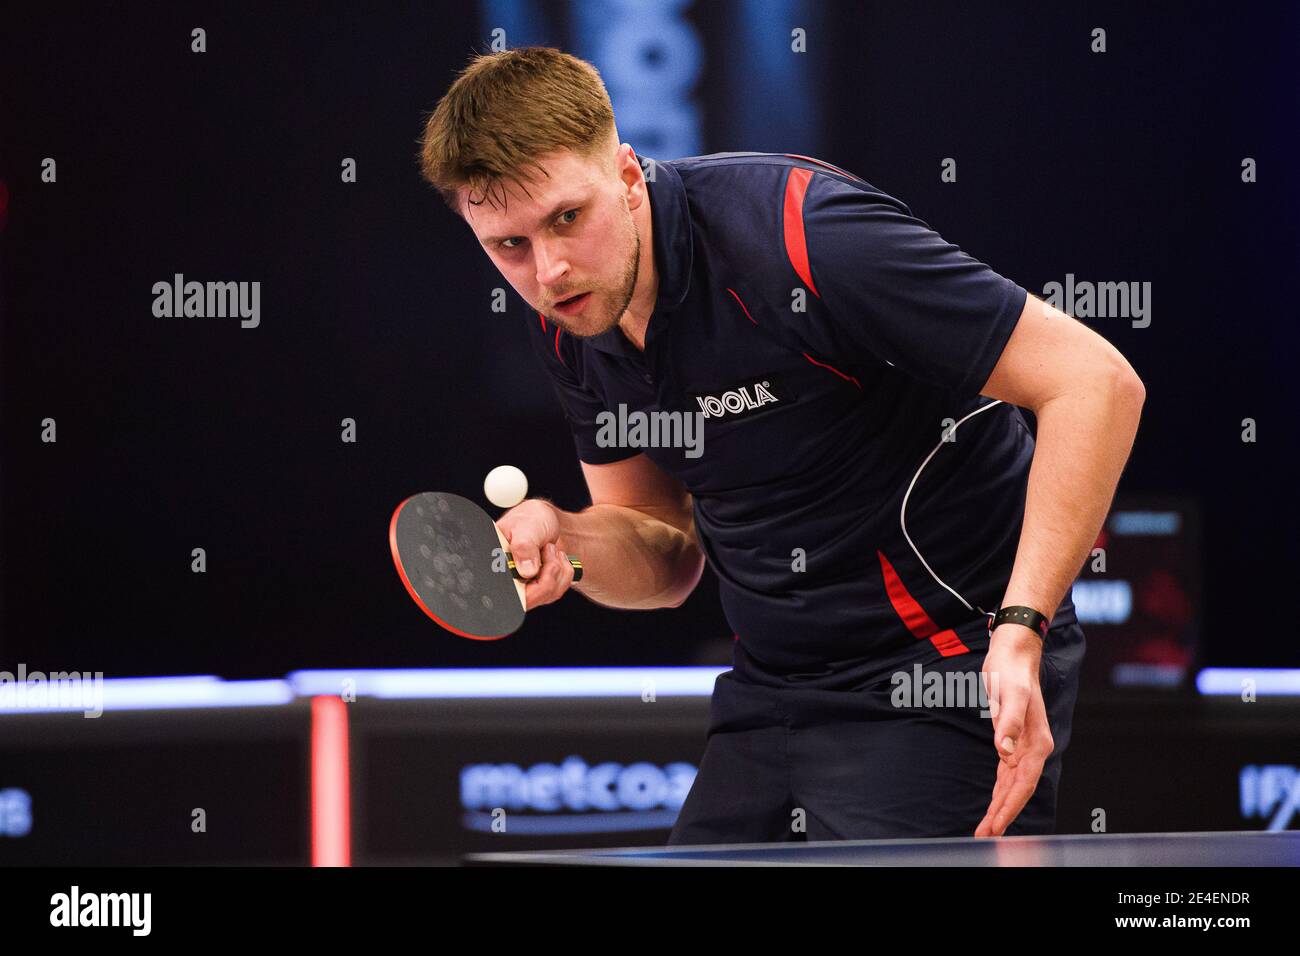 COVENTRY, ROYAUME-UNI. 23 janvier 2021. Tomas Mikutis (LTU) pendant 2021 World Ping pong Masters à Ricoh Arena le samedi 23 janvier 2021 à COVENTRY, ANGLETERRE. Credit: Taka G Wu/Alay Live News Banque D'Images